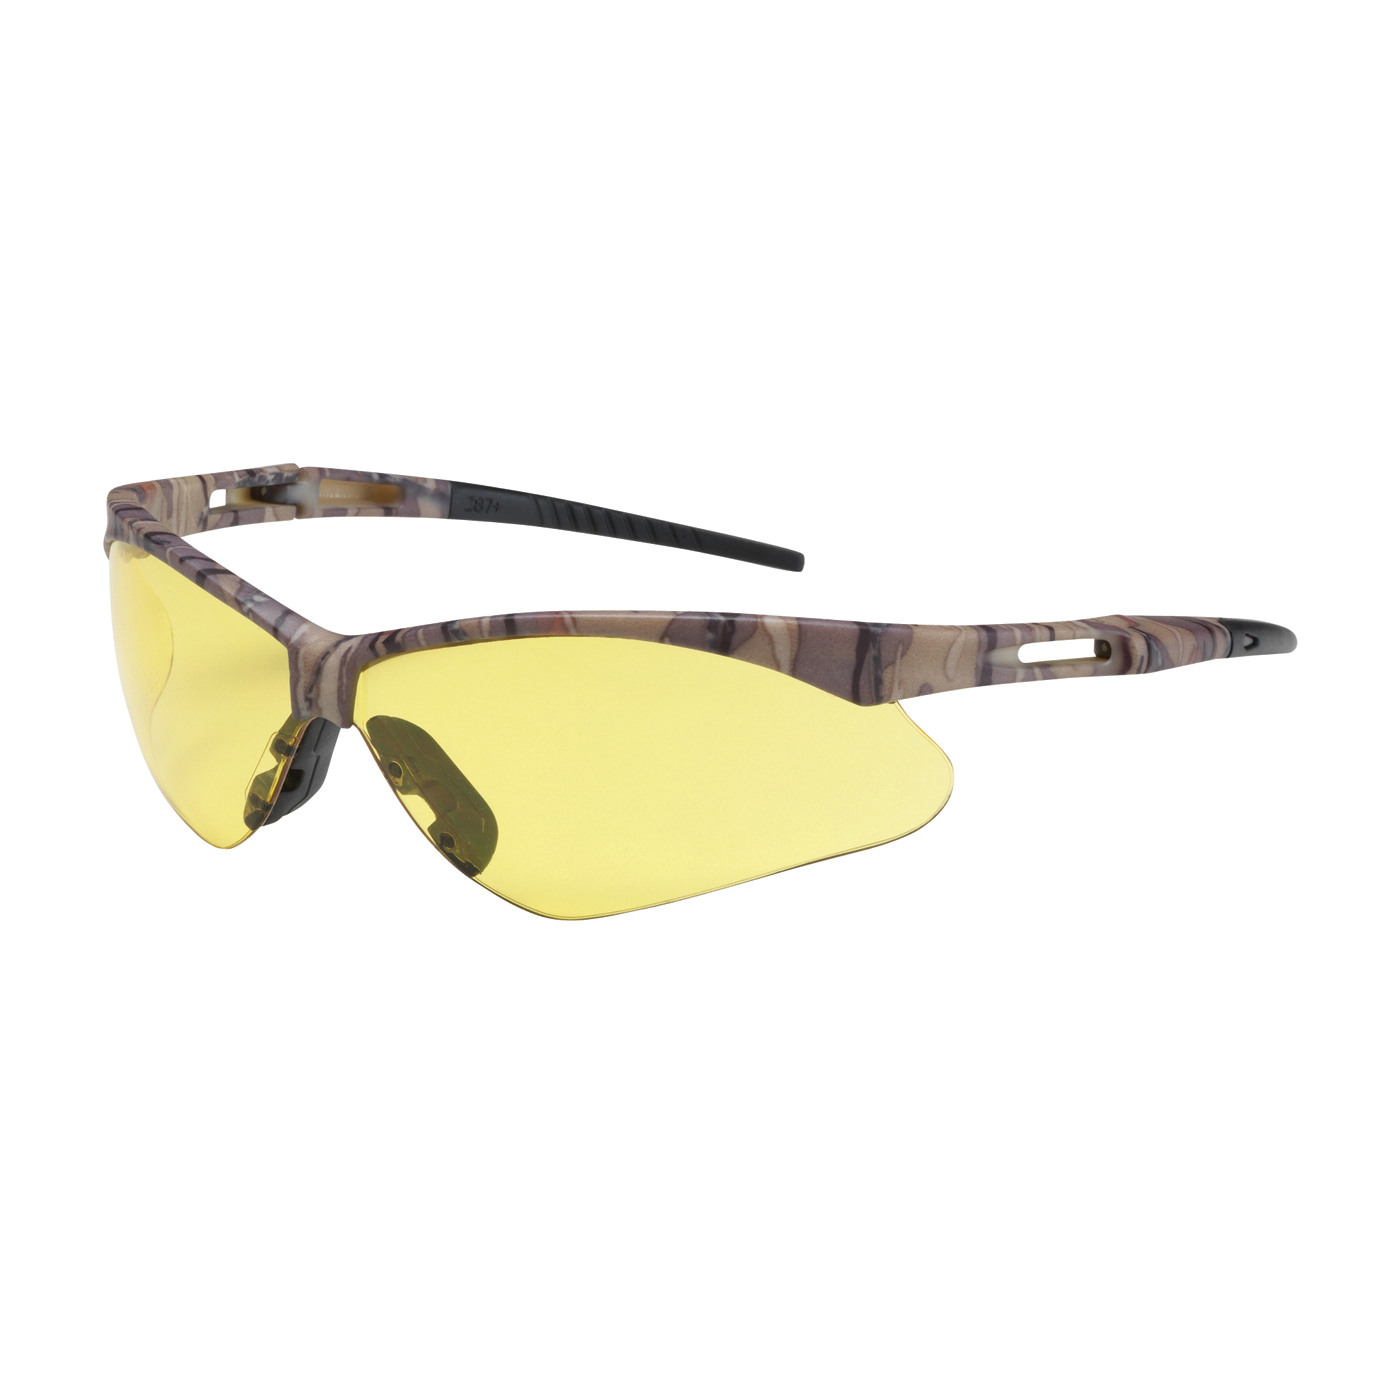 *Free with Purchase - Bouton® 250-AN-10122 Anser™ 250-AN Dual Lens Safety Glasses With Adjustable Neck Cord, Anti-Scratch, Amber Lens, Semi-Rimless Frame, Camouflage, Polycarbonate Frame, Polycarbonate Lens, ANSI Z87.1+, CSA Z94.3